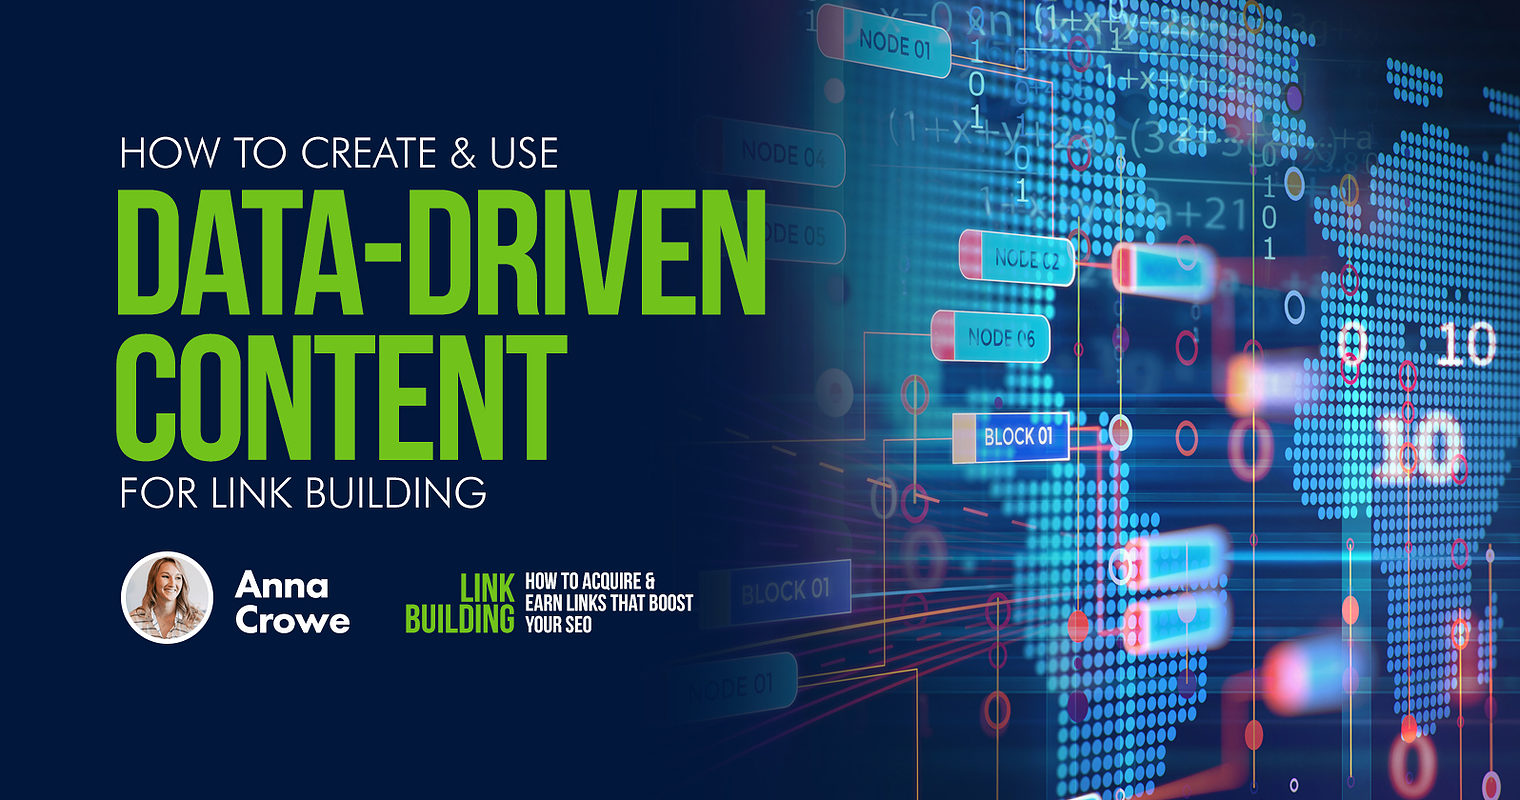 How to Create & Use Data-Driven Content for Link Building